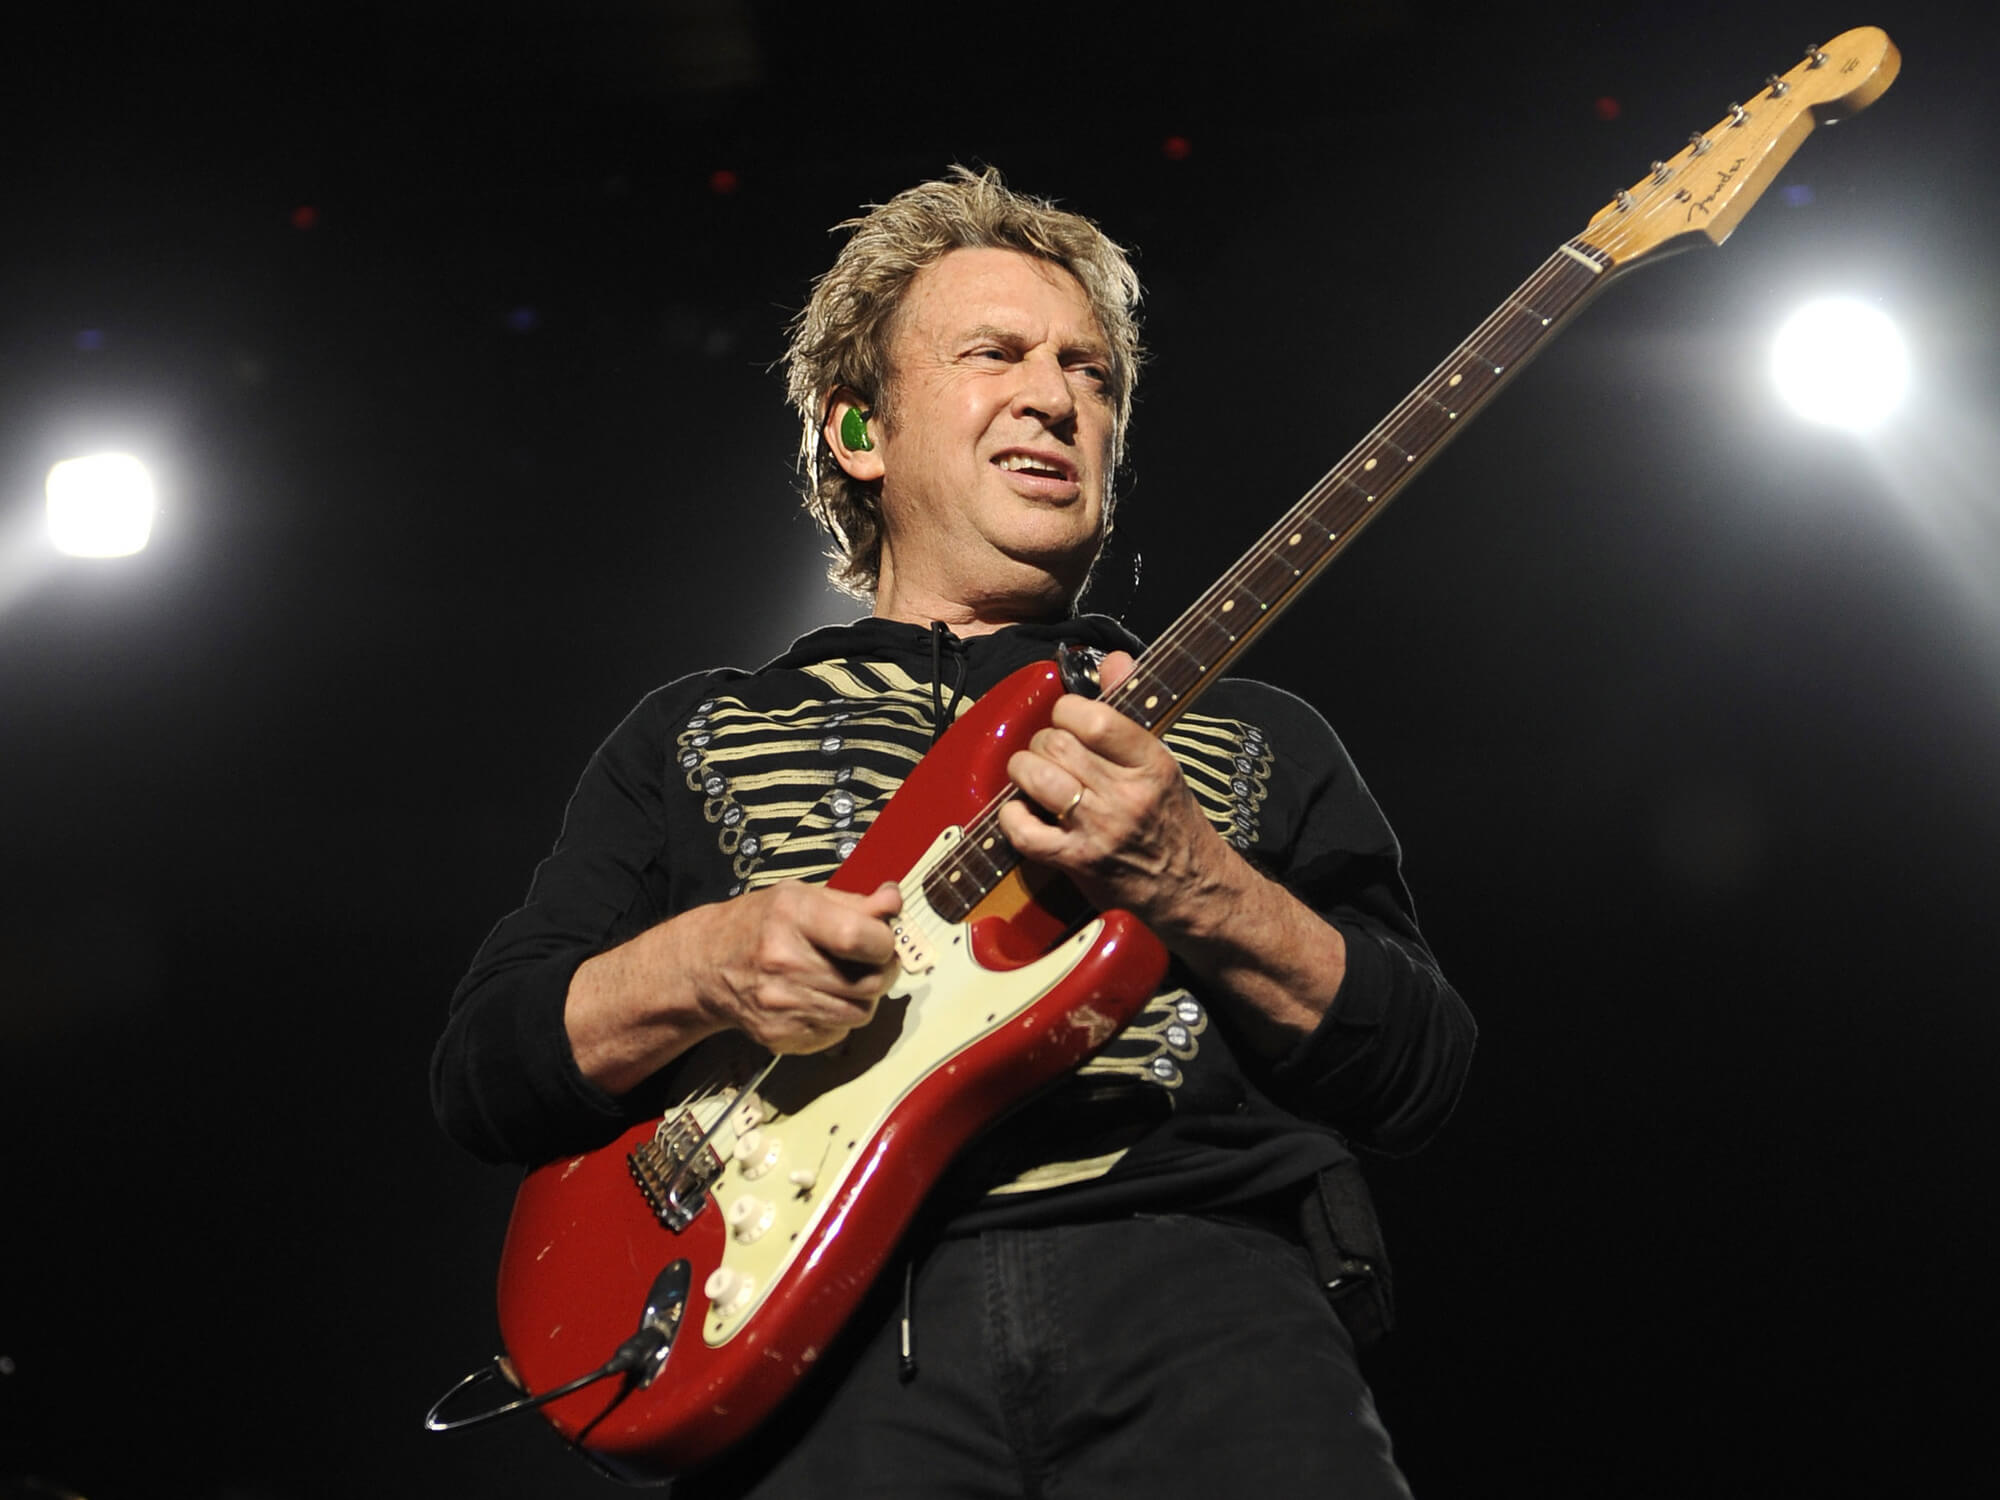 Andy Summers performing